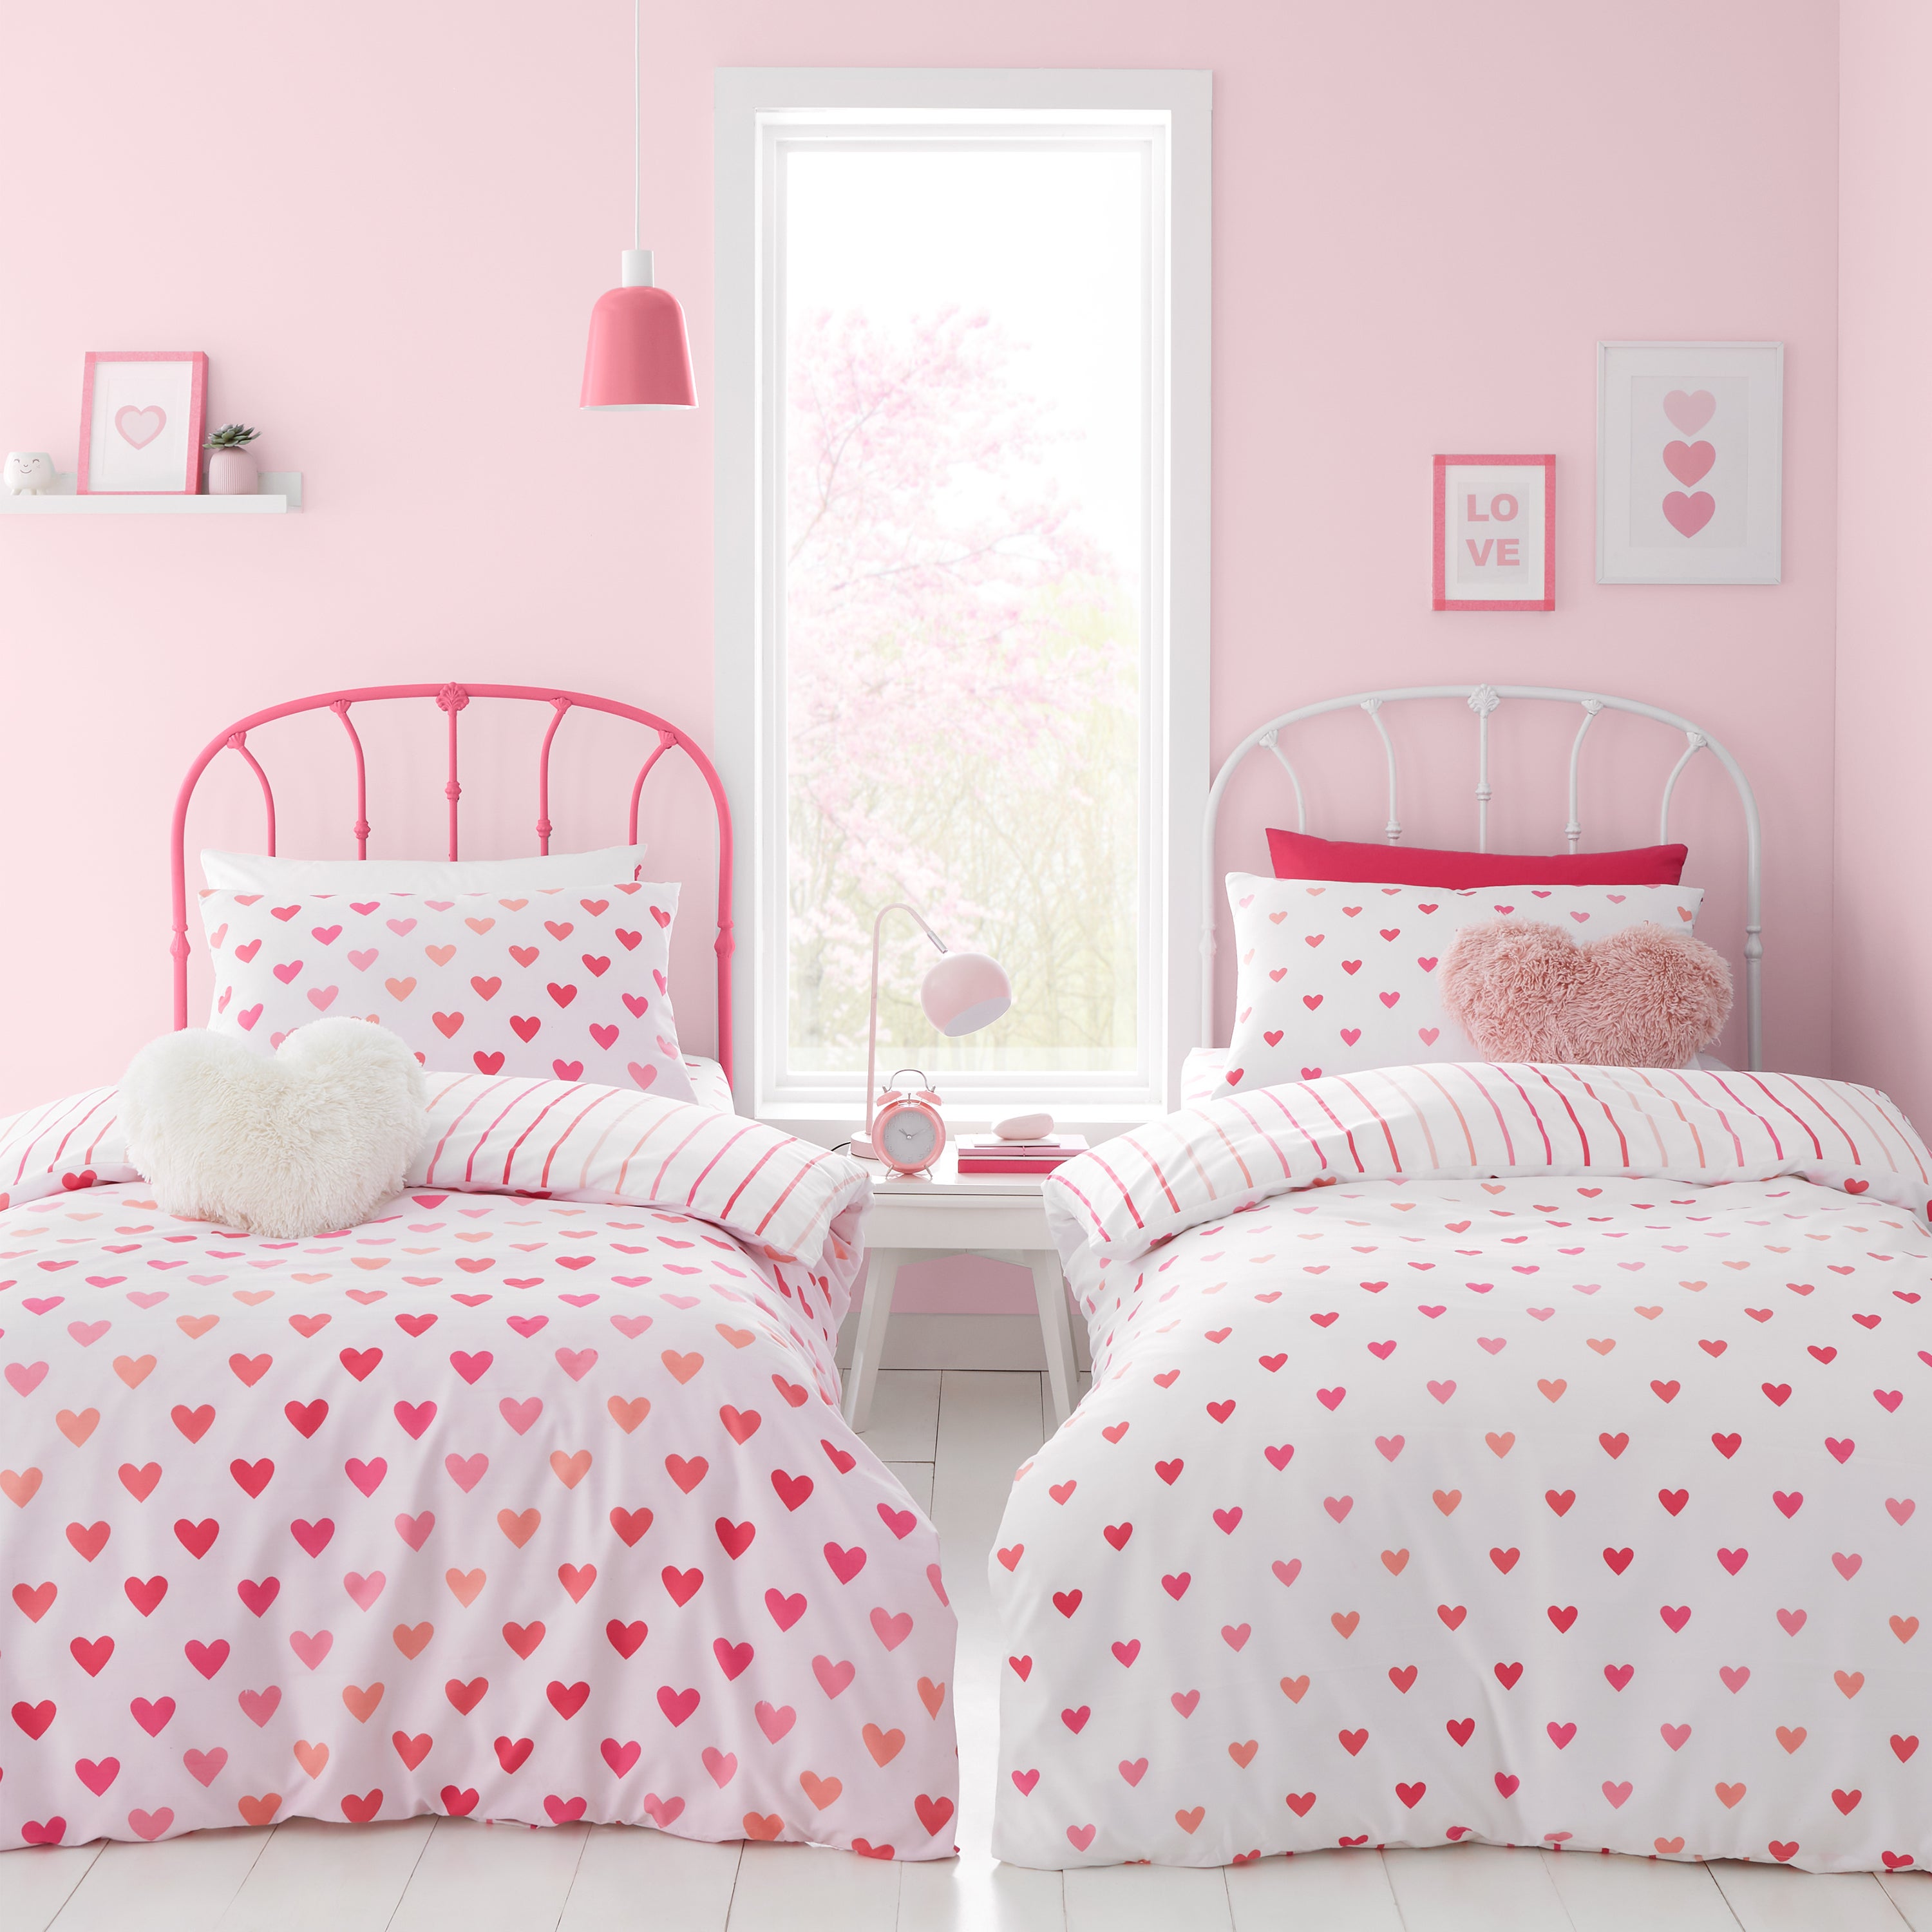 Set Of 2 Hearts And Stripes Reversible Duvet Cover And Pillowcase Sets Multicoloured